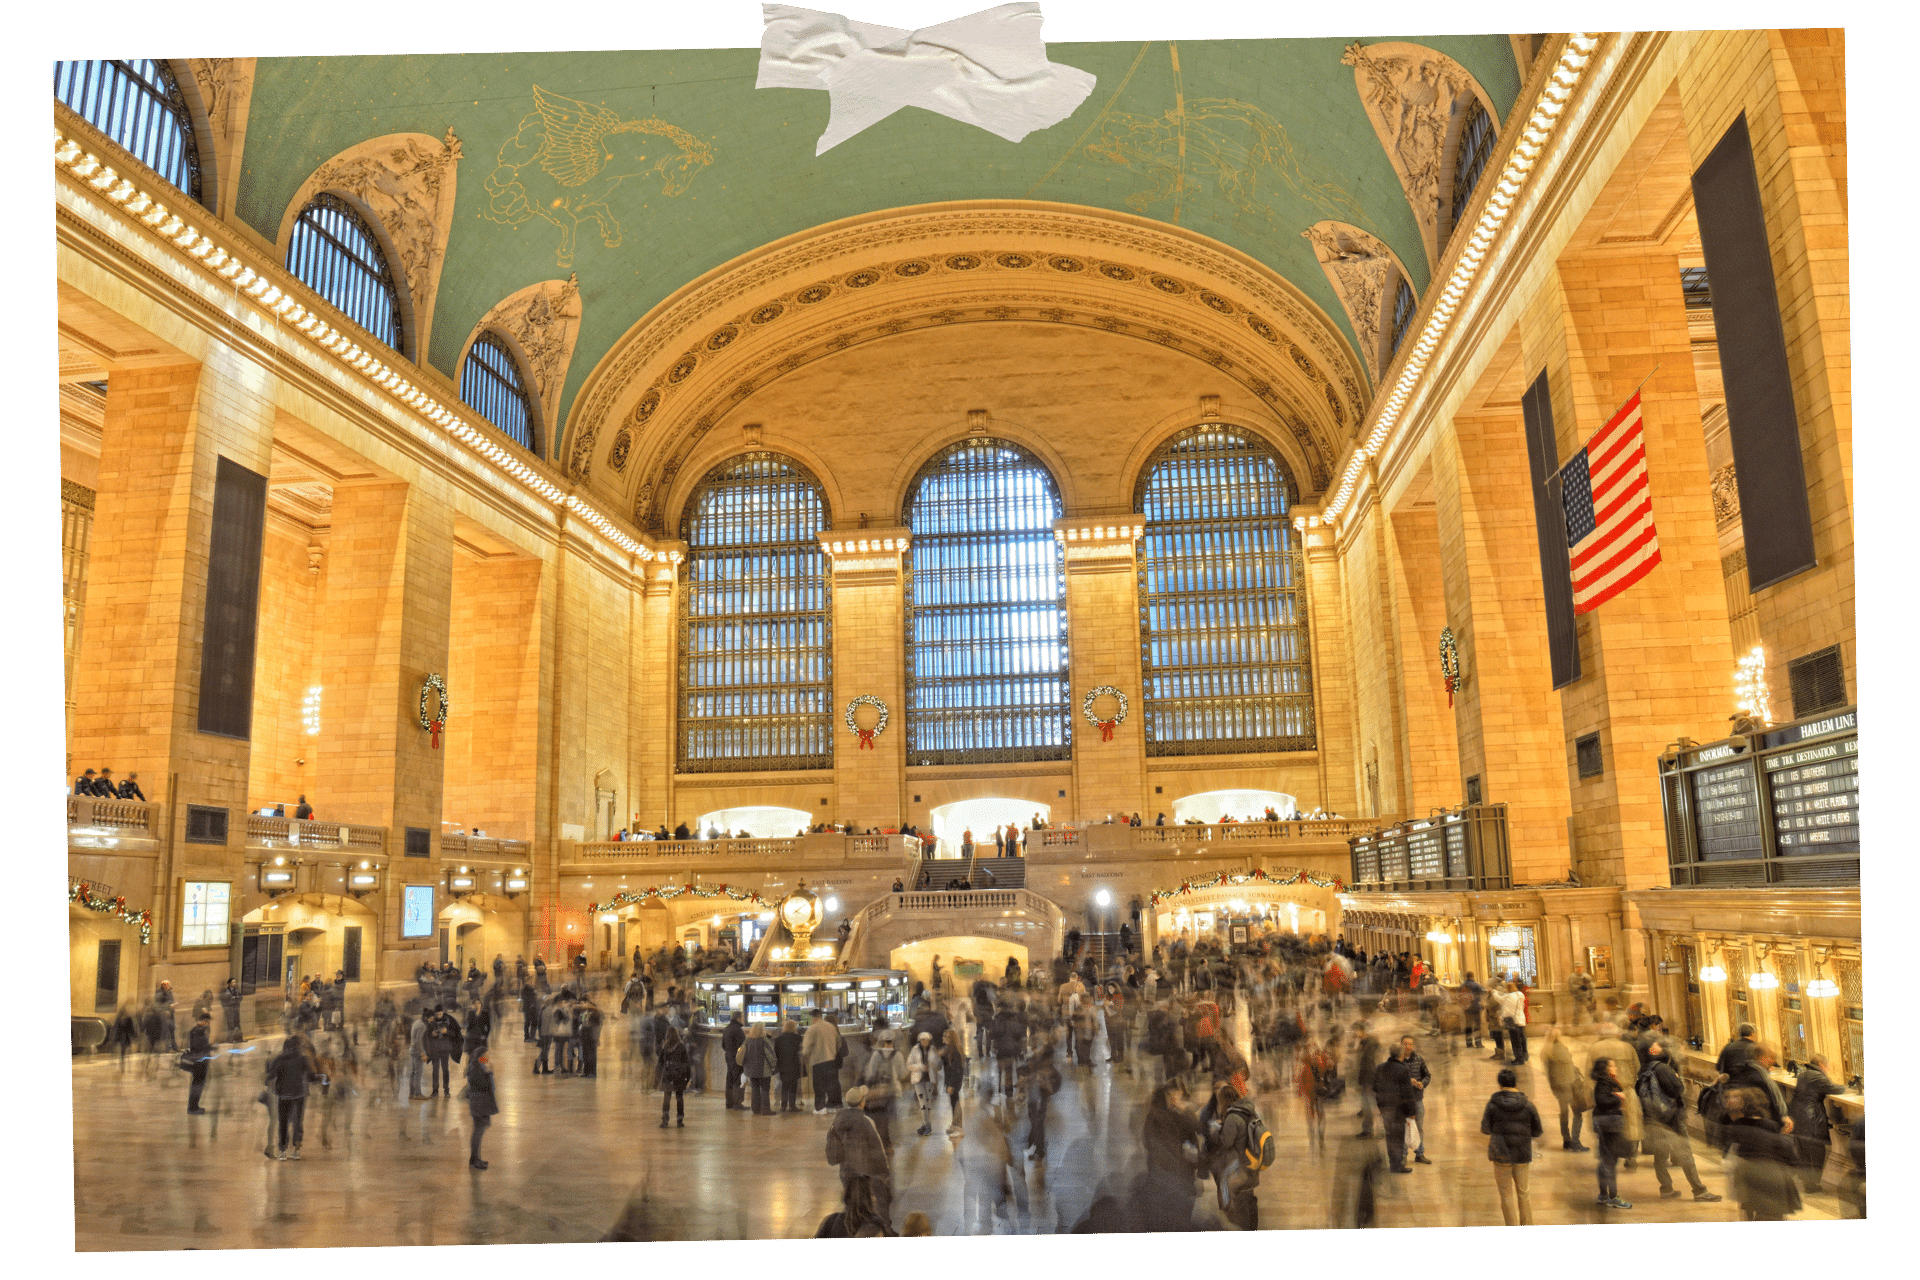 When it comes to New York for Foodies, The Grand Central Oyster Bar is a must. Pictured is the main hall of Grand Central Station in New York, with many commuters moving about and out of focus.